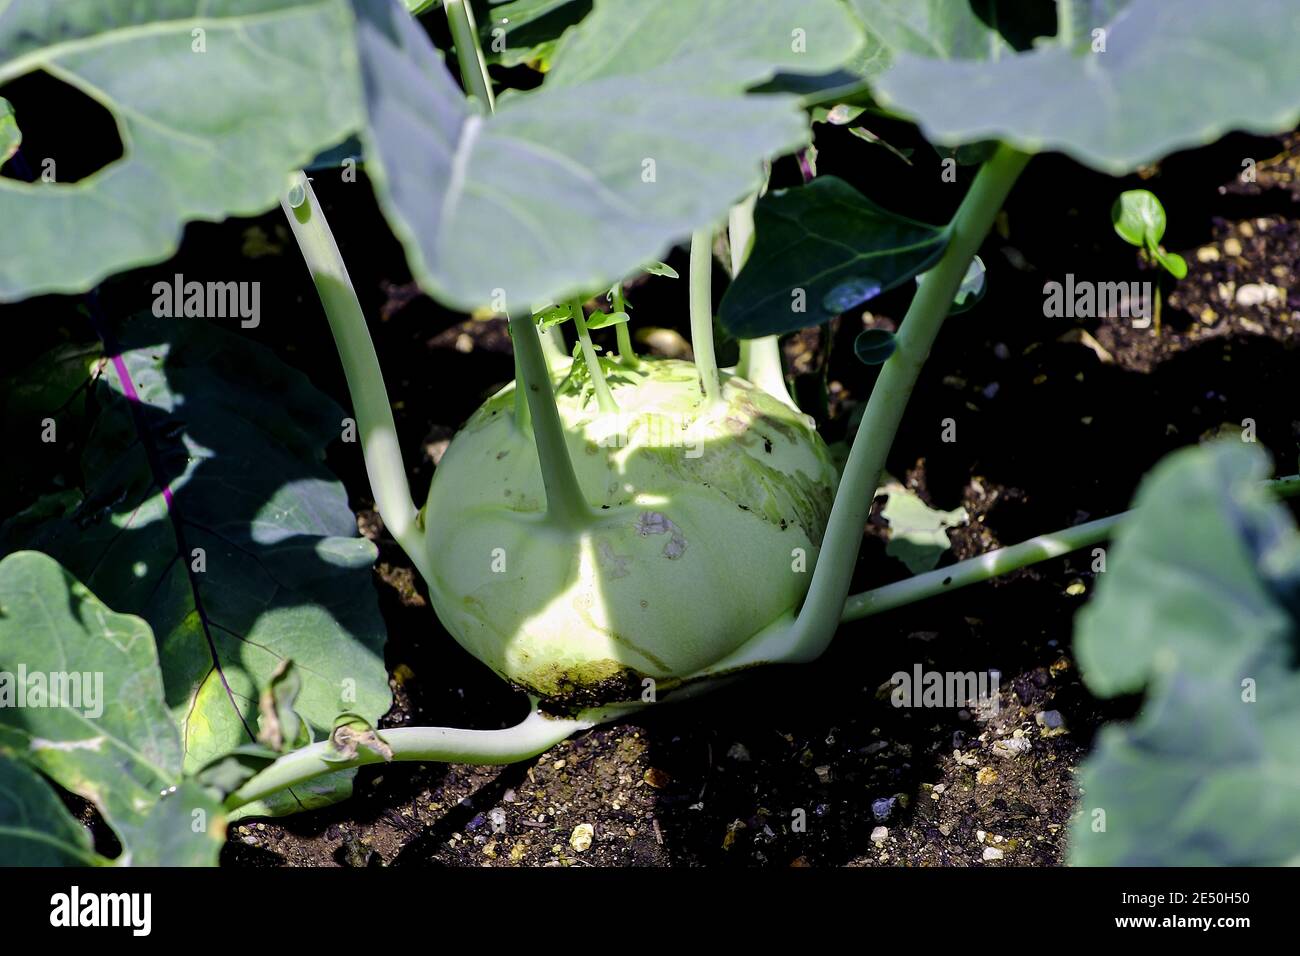 White Turnip cabbage in the vegetable patch, Brassica oleracea, Bavaria, Germany, Europe Stock Photo